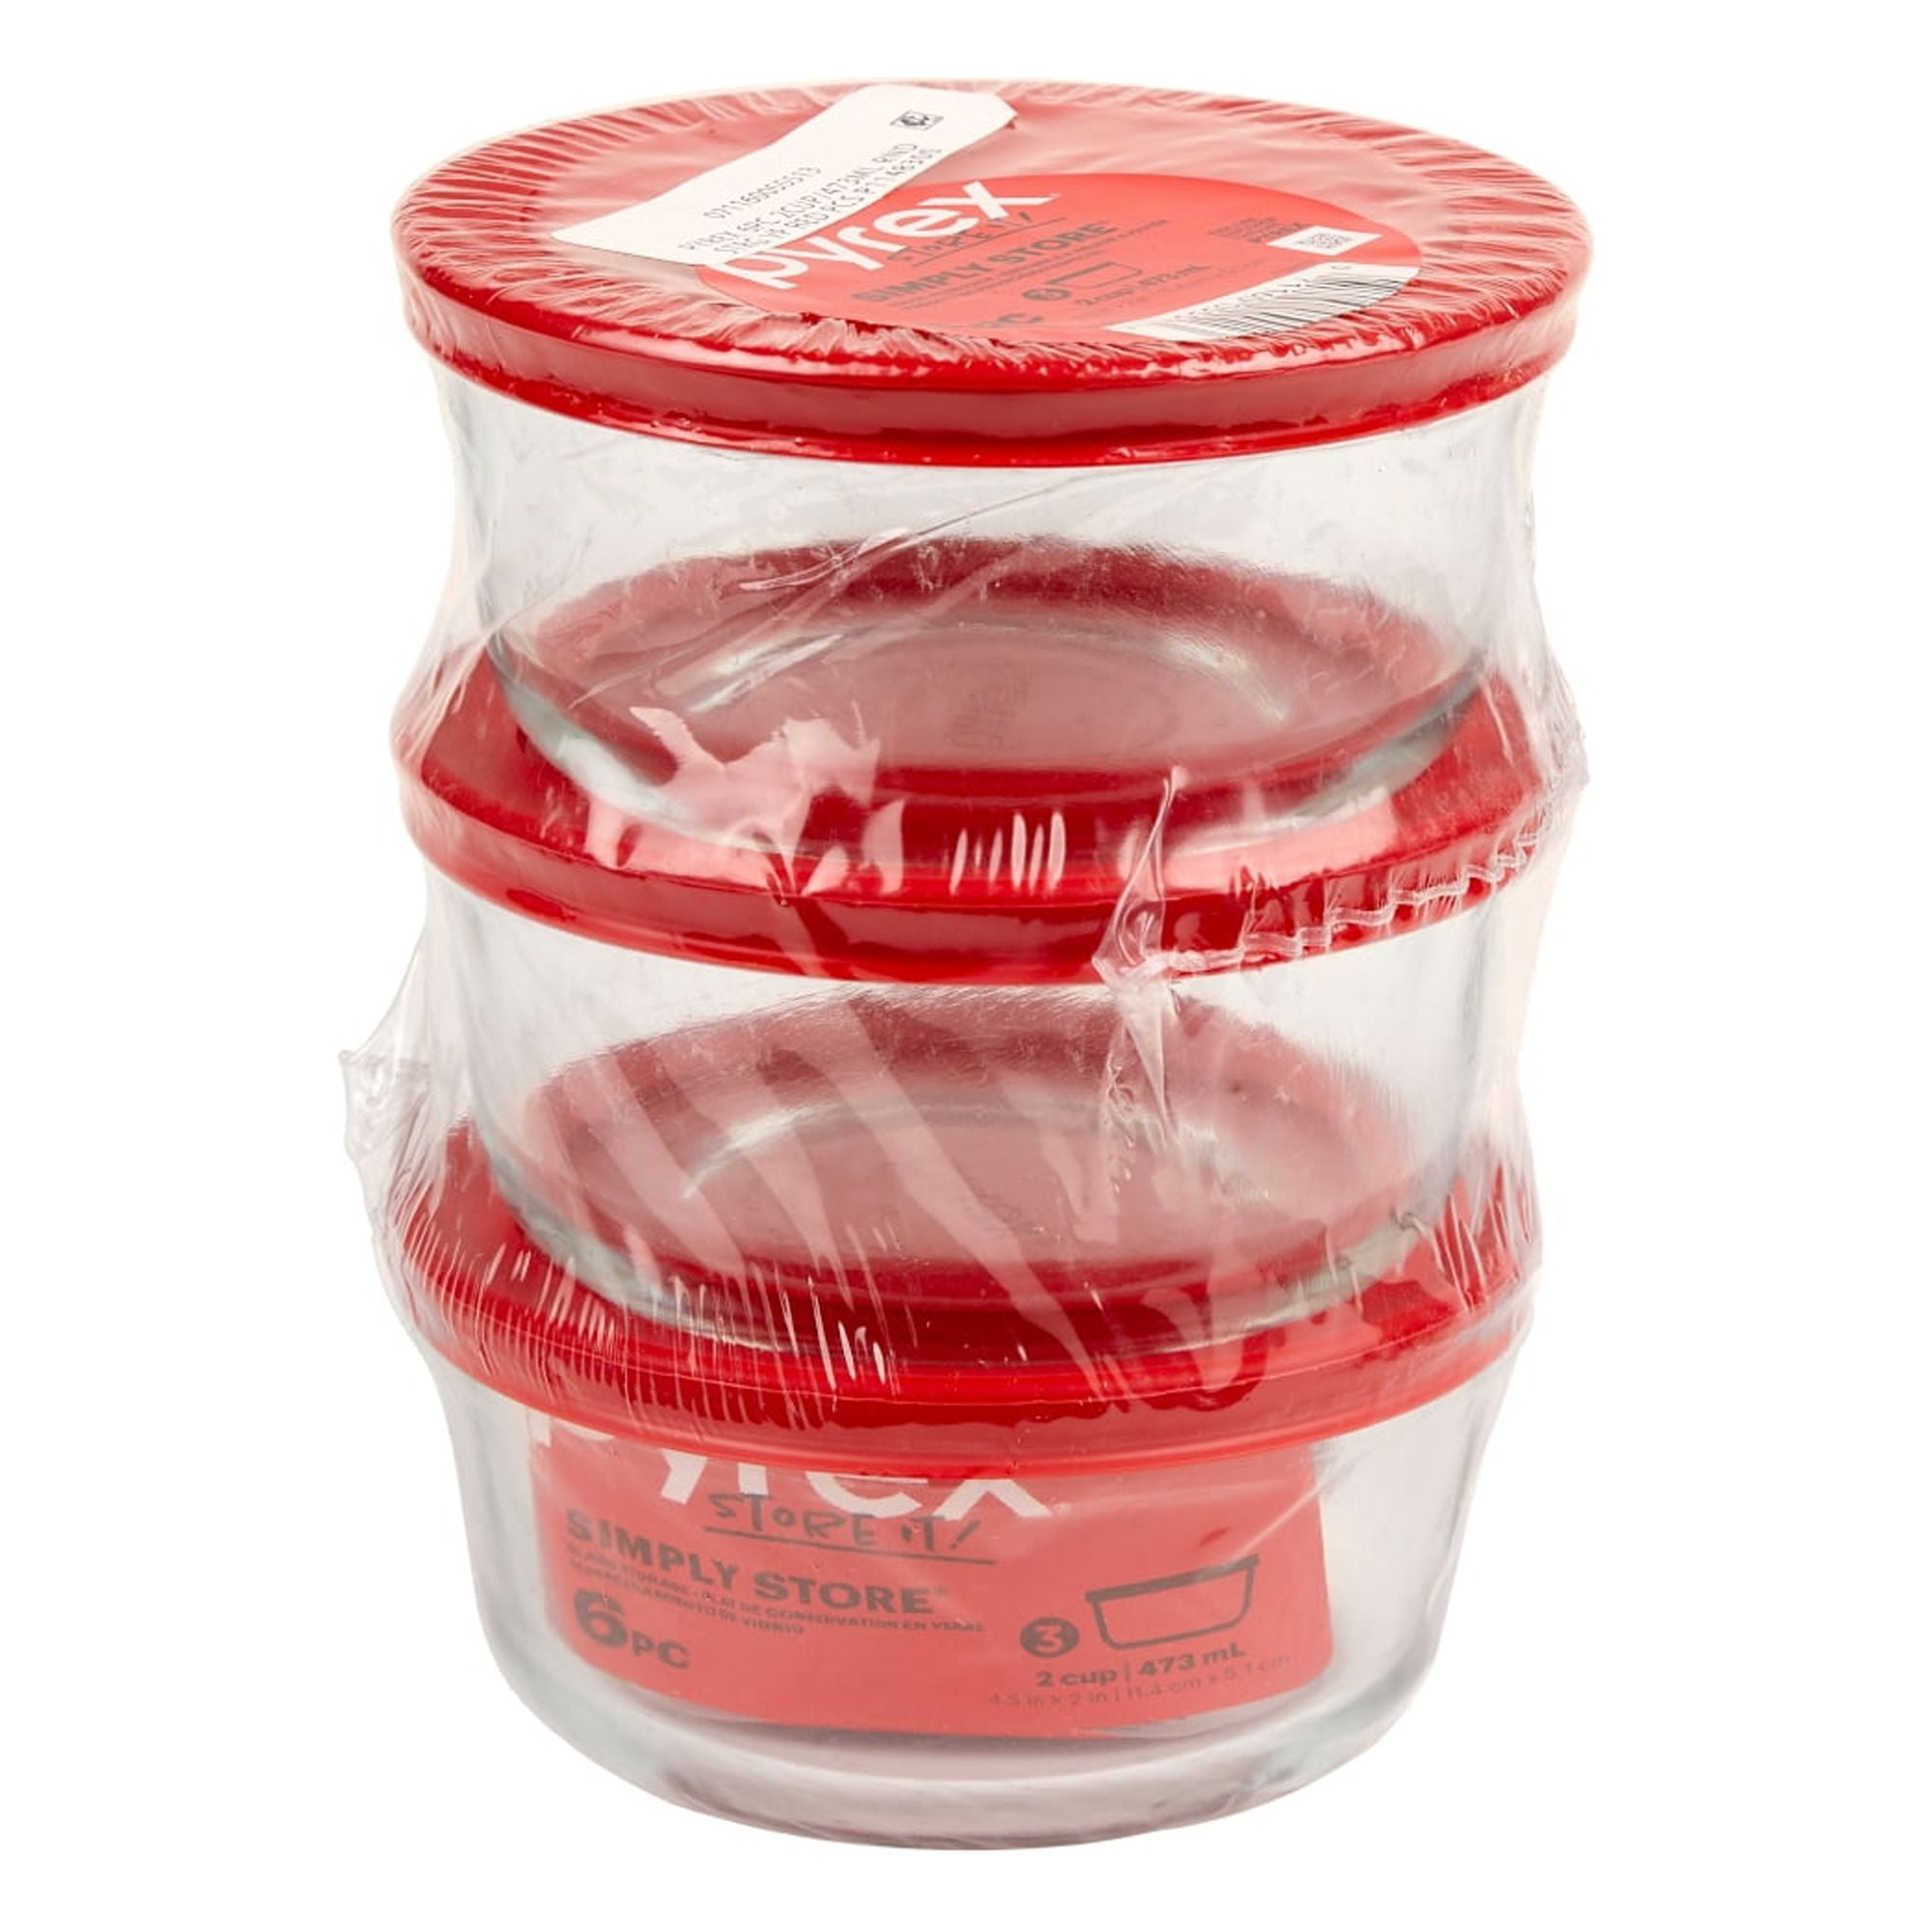 Food storage containers: The best deals on Pyrex, Rubbermaid and more